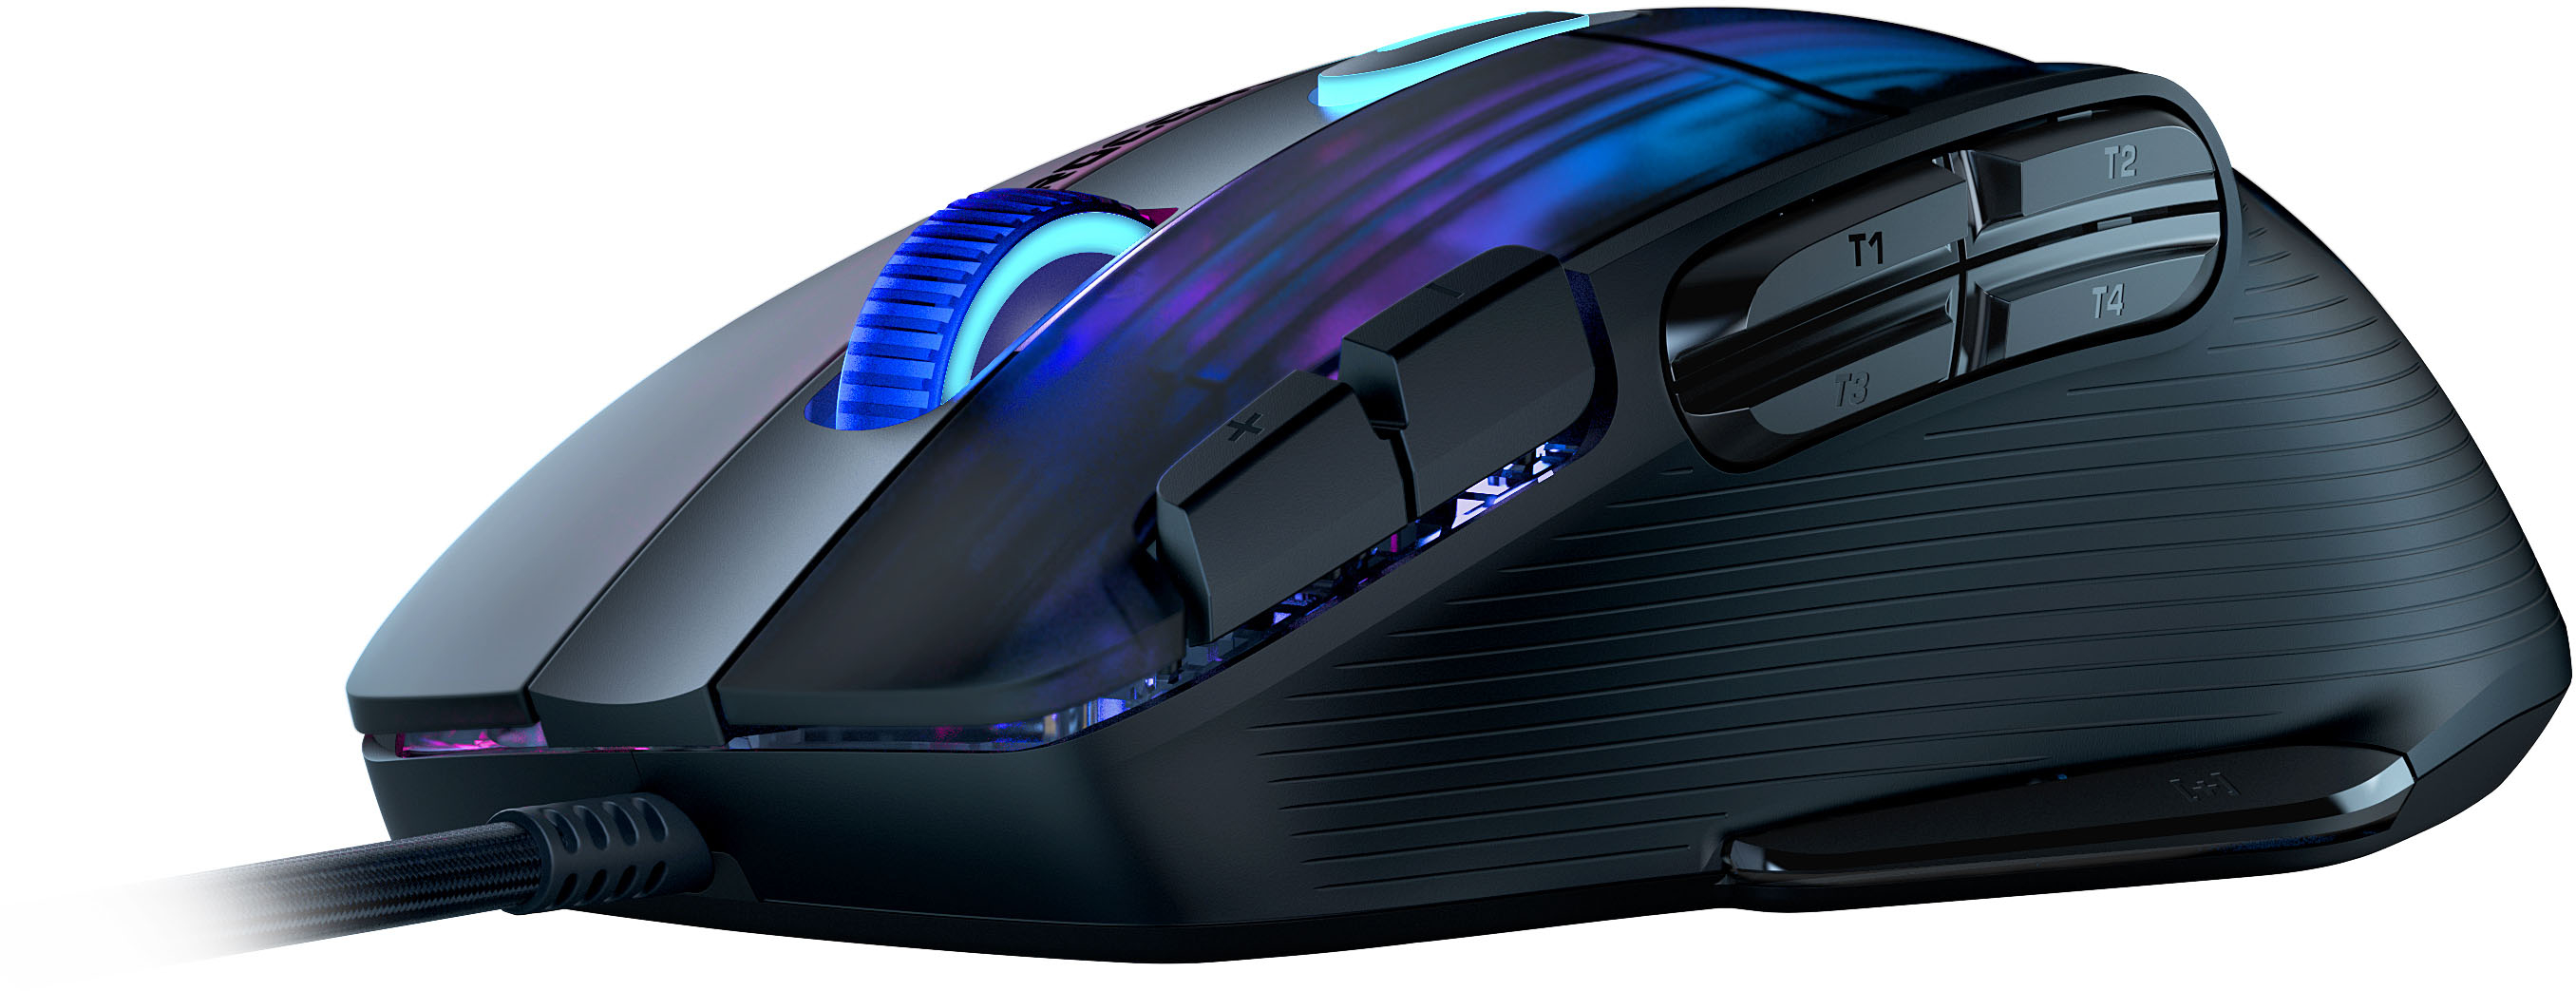 ROCCAT Kone XP Wired Optical Gaming Ambidextrous Mouse with multi-button  design & AIMO RGB lighting Black ROC-11-420-01 - Best Buy